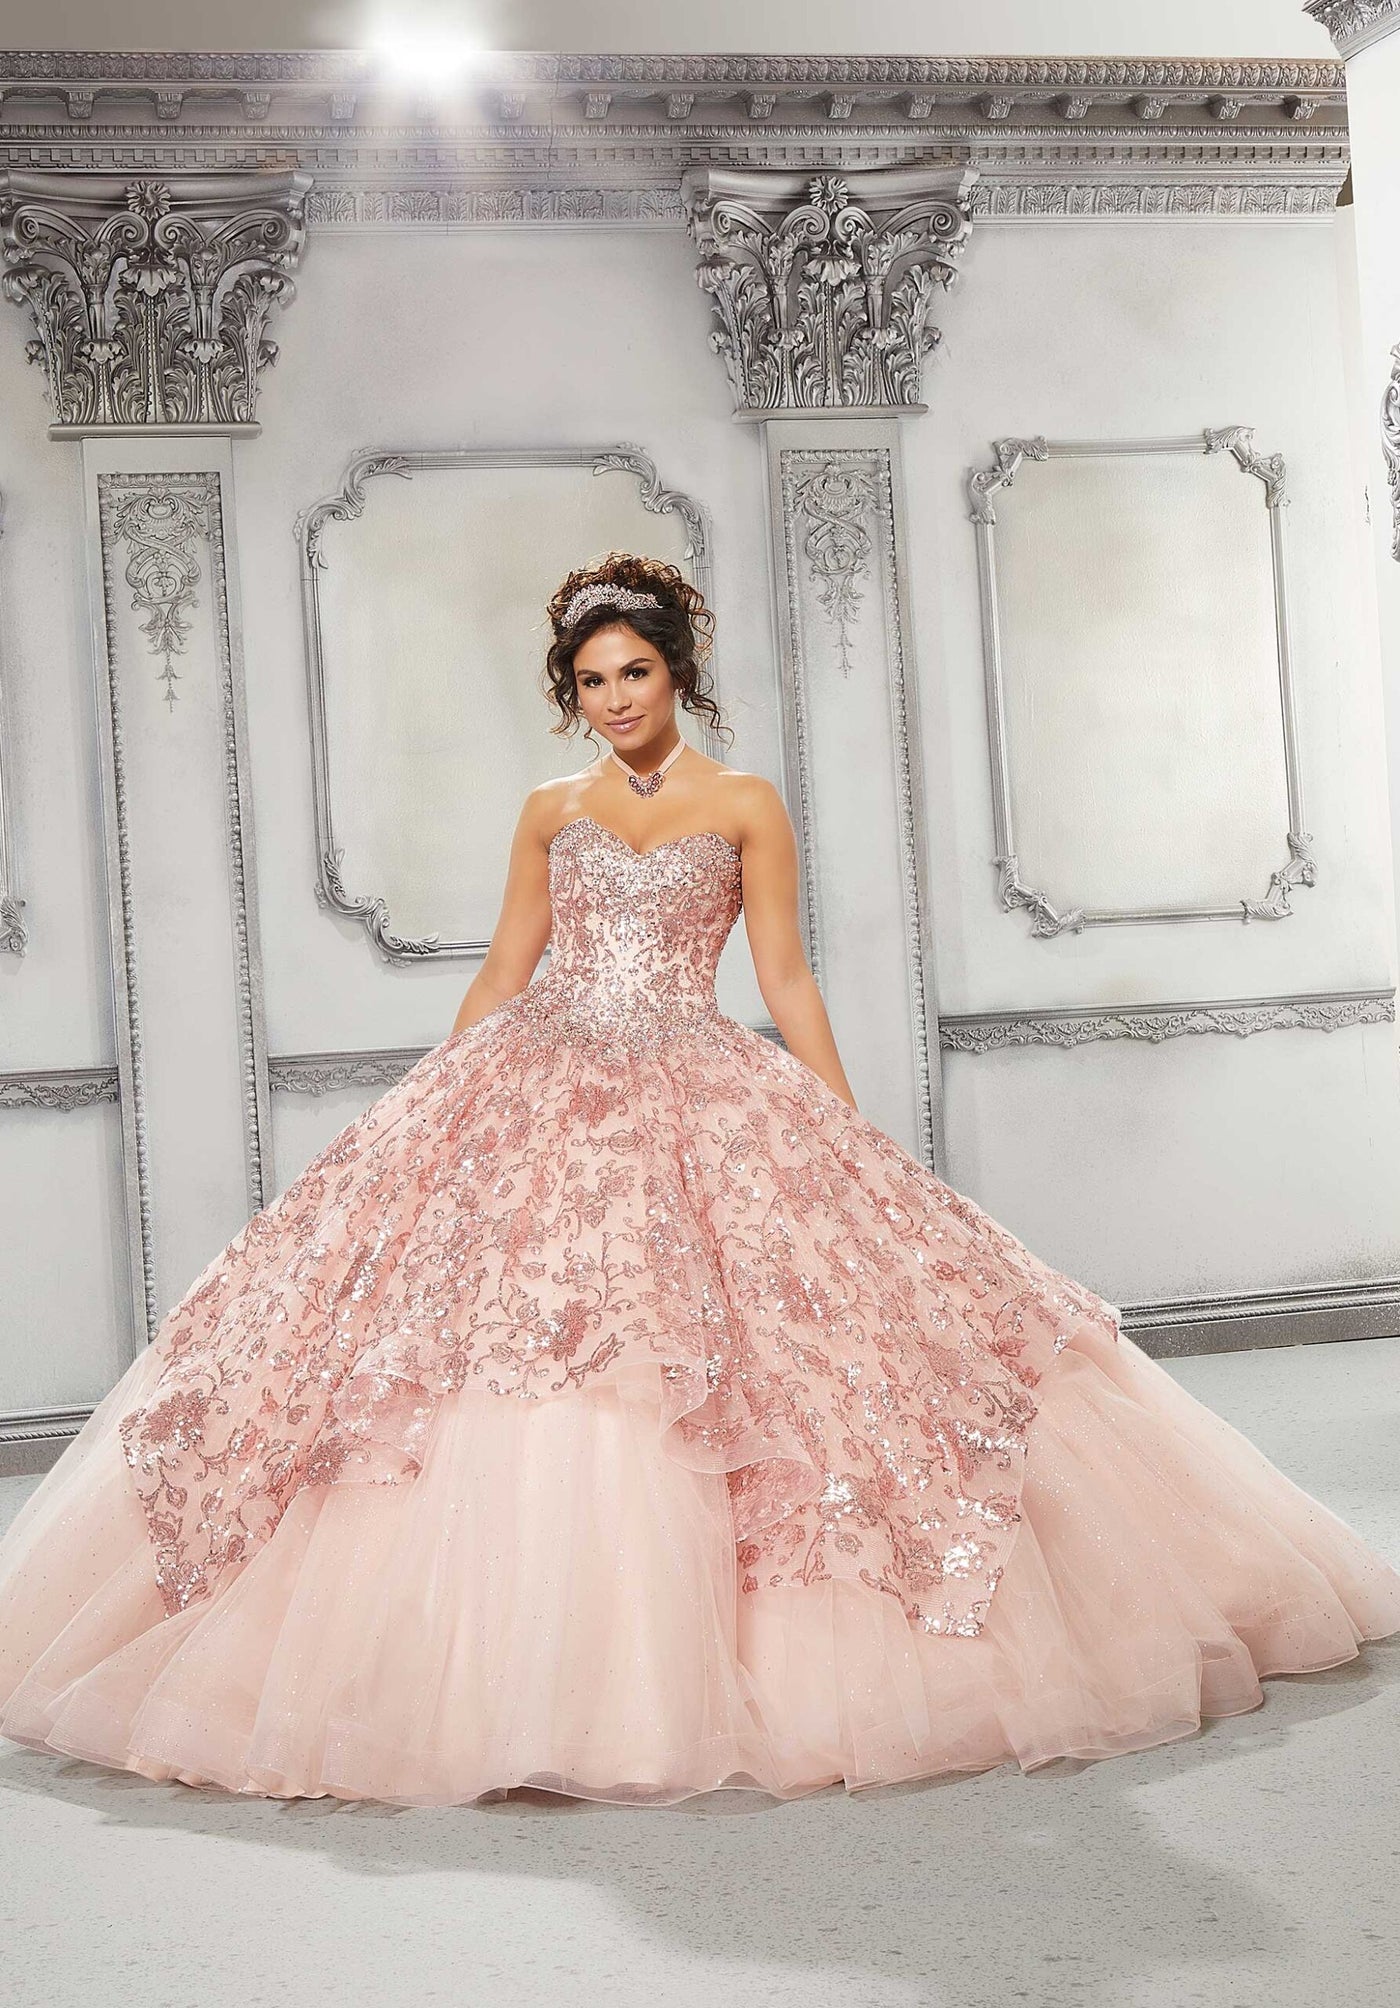 Sequined Lace and Glitter Tulle Quinceañera Dress #89314